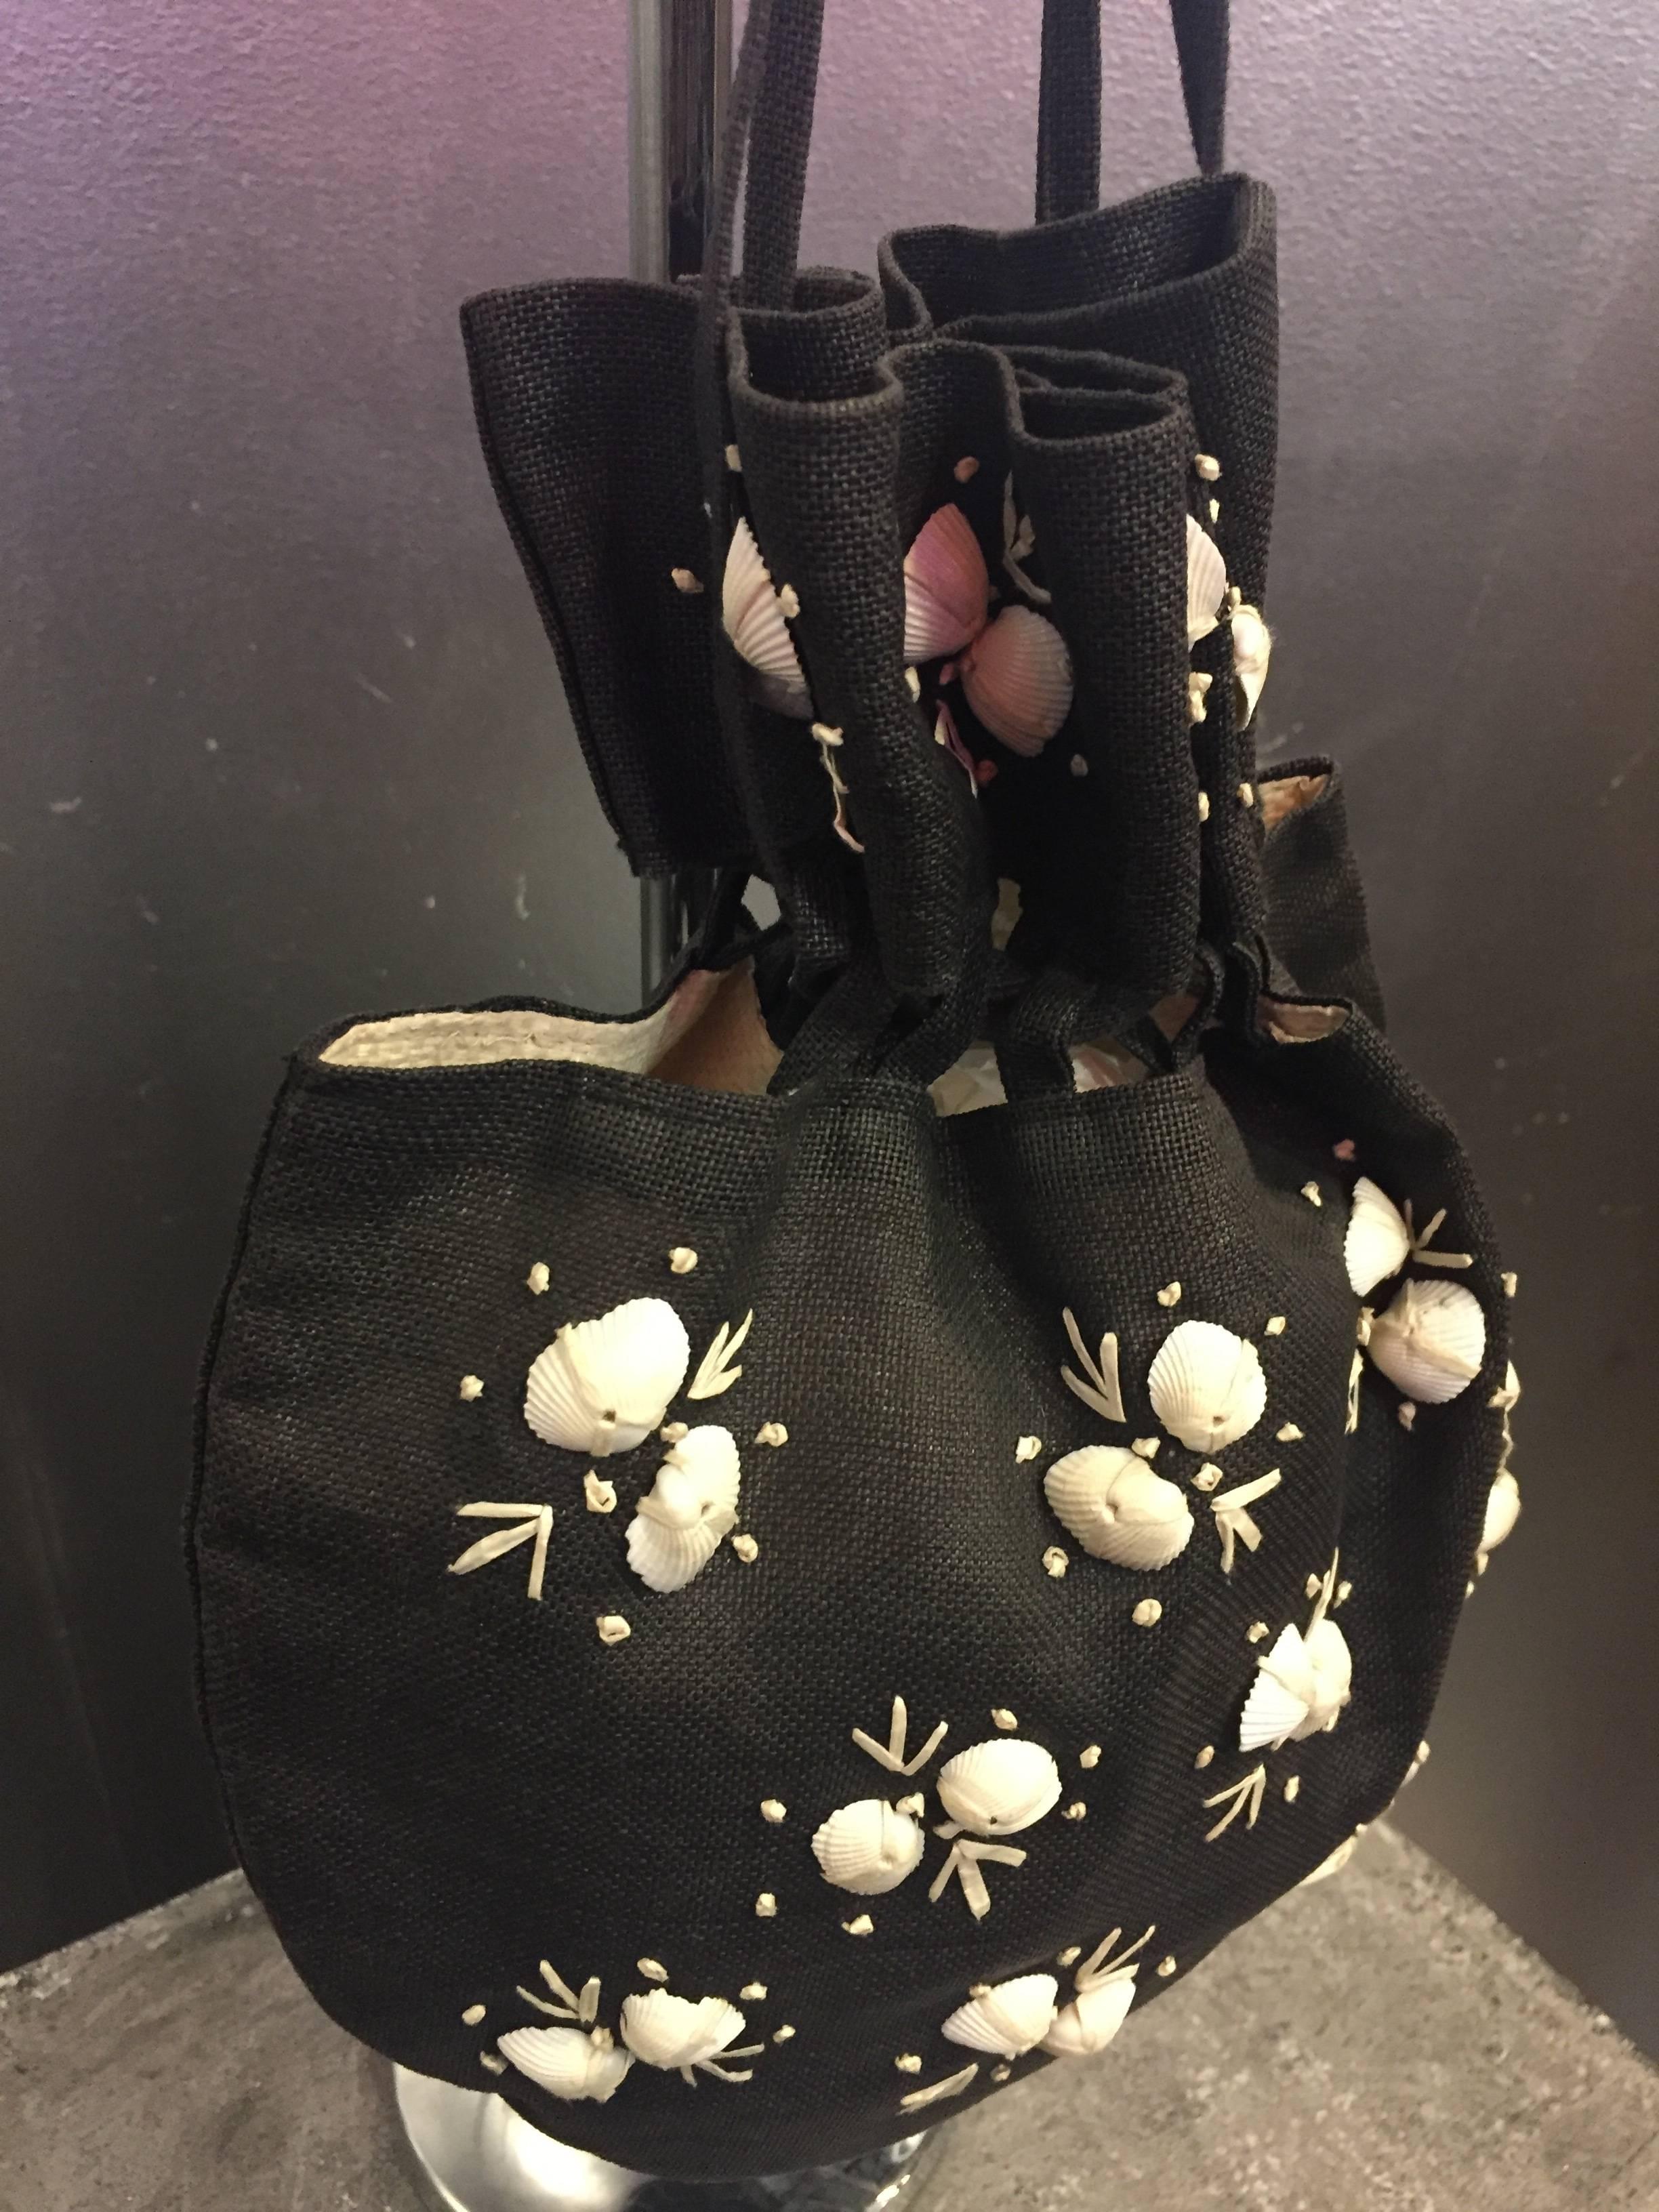 Women's 1950's Black Straw Pouch Bag with White Seashells 